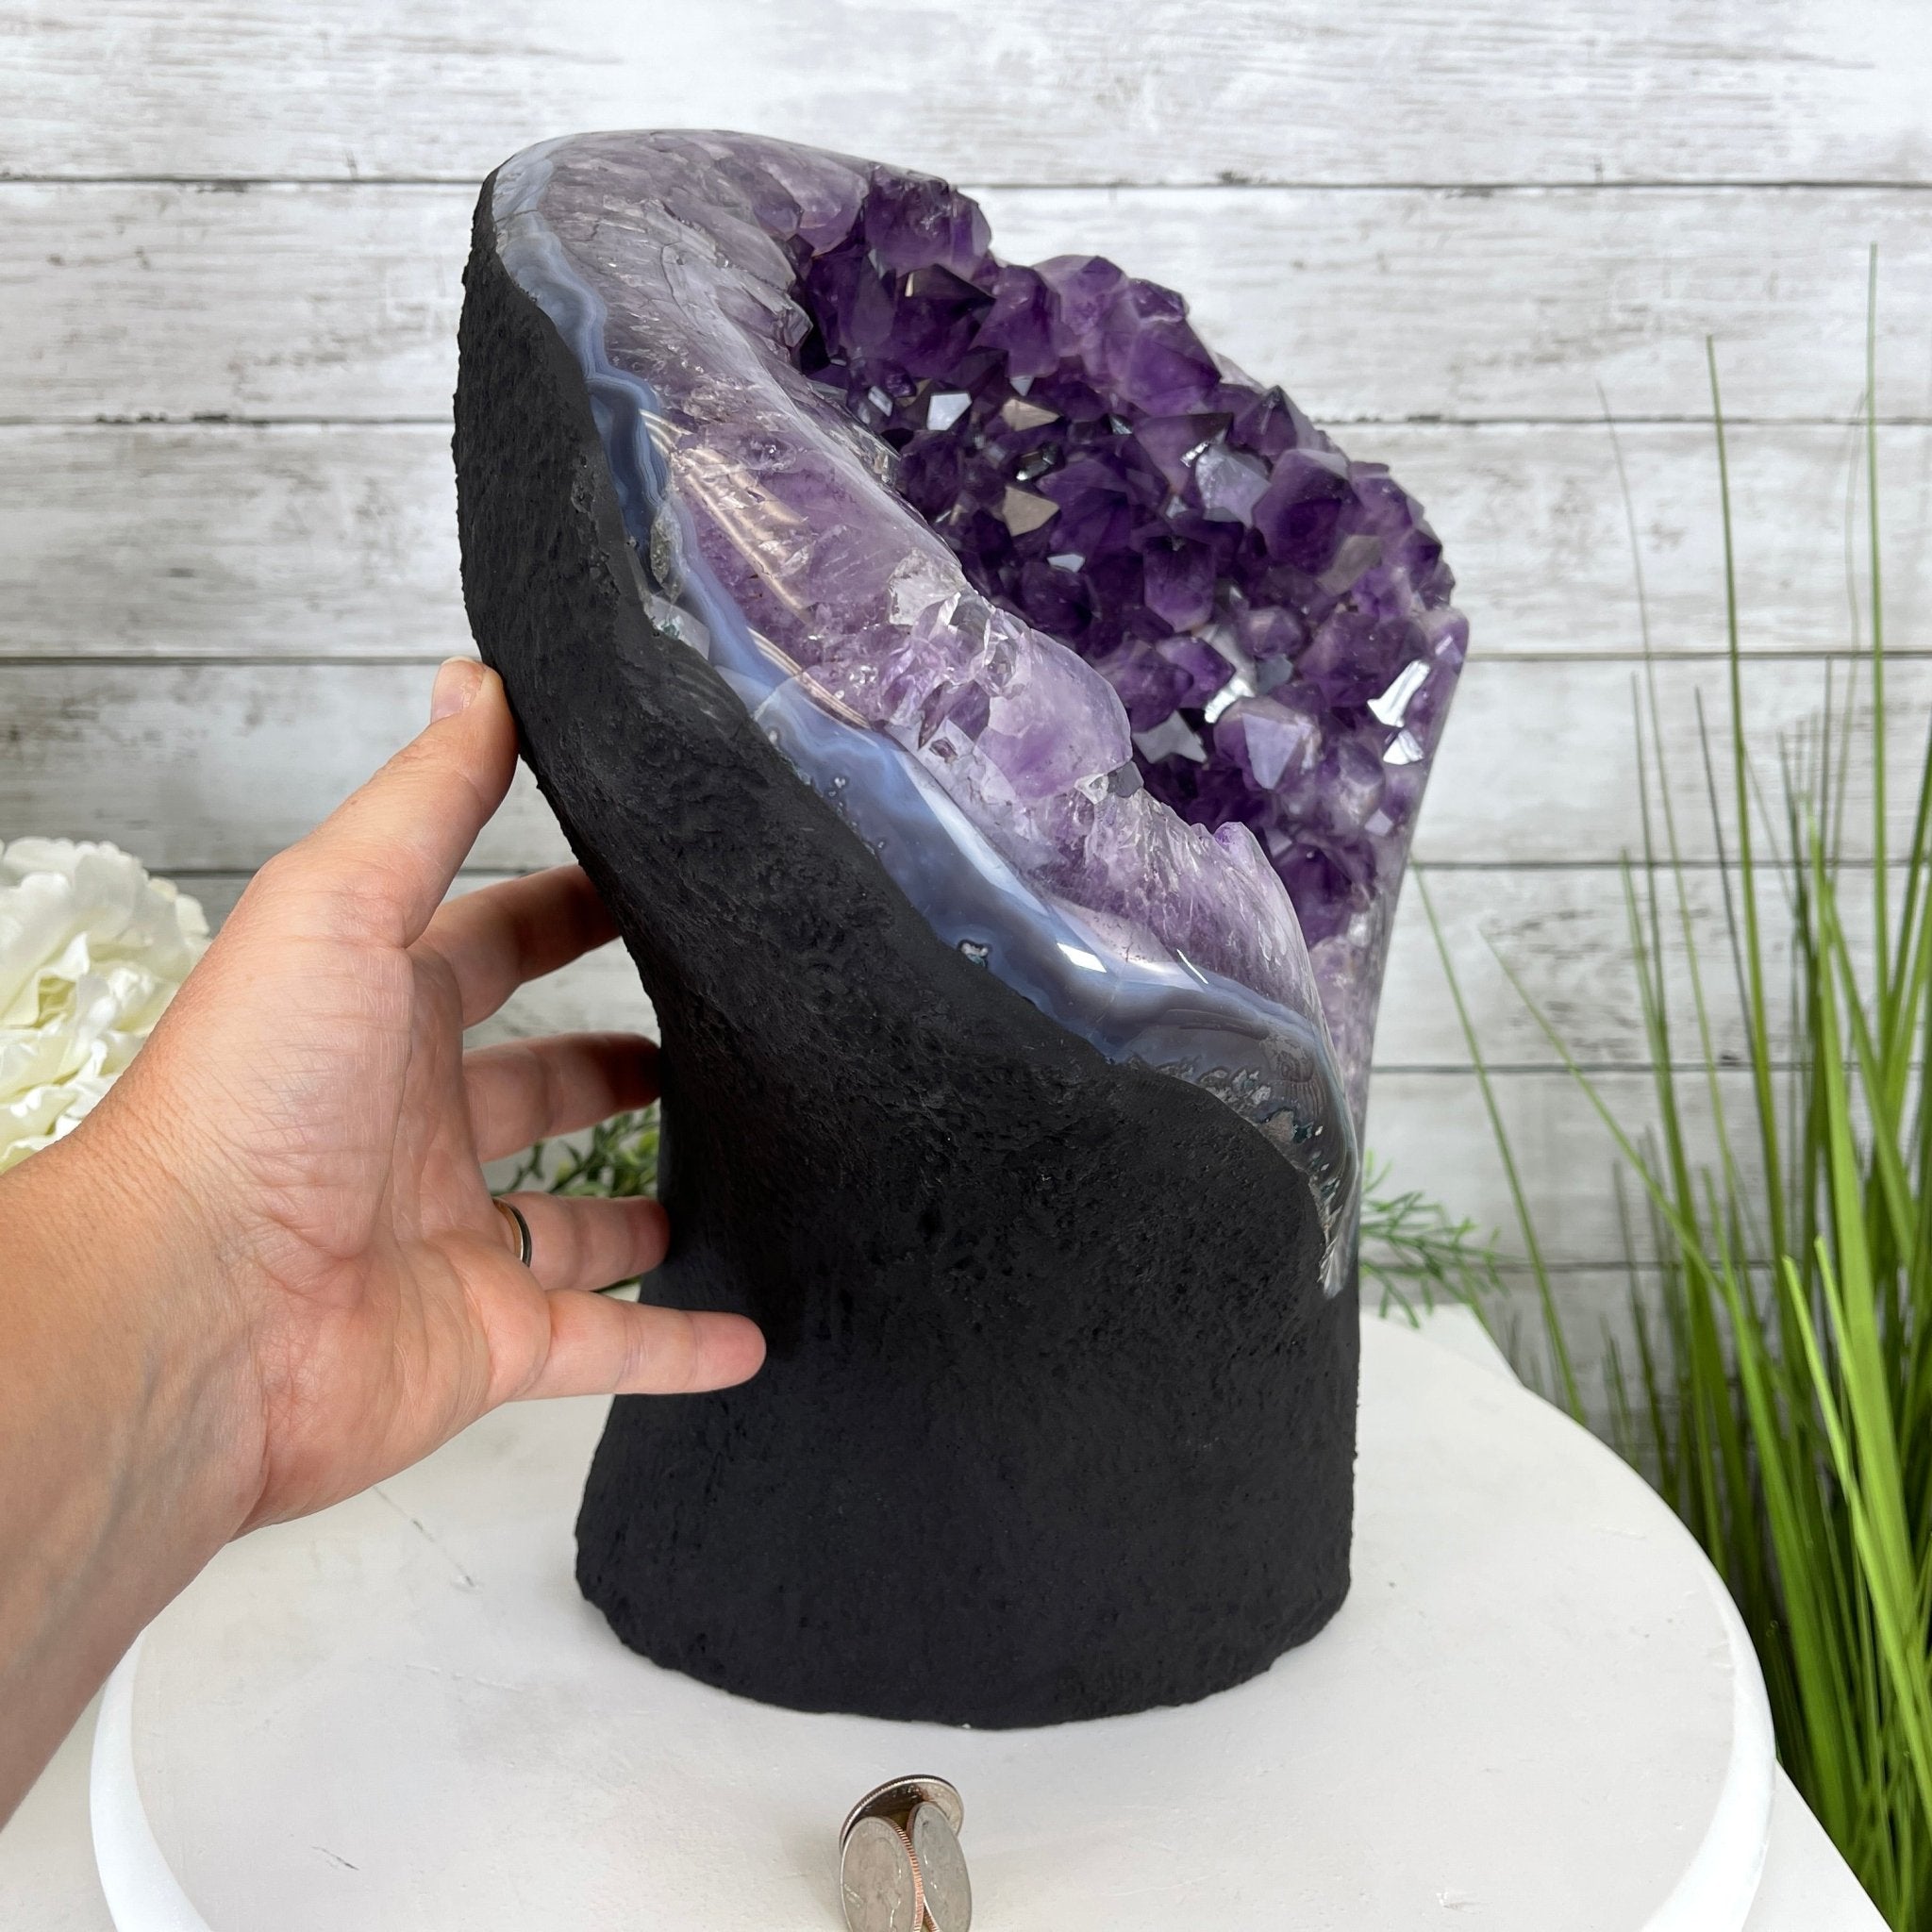 Extra Quality Amethyst Druse Cluster on Cement Base, 35 lbs and 12.5" Tall #5614-0051 - Brazil GemsBrazil GemsExtra Quality Amethyst Druse Cluster on Cement Base, 35 lbs and 12.5" Tall #5614-0051Clusters on Cement Bases5614-0051